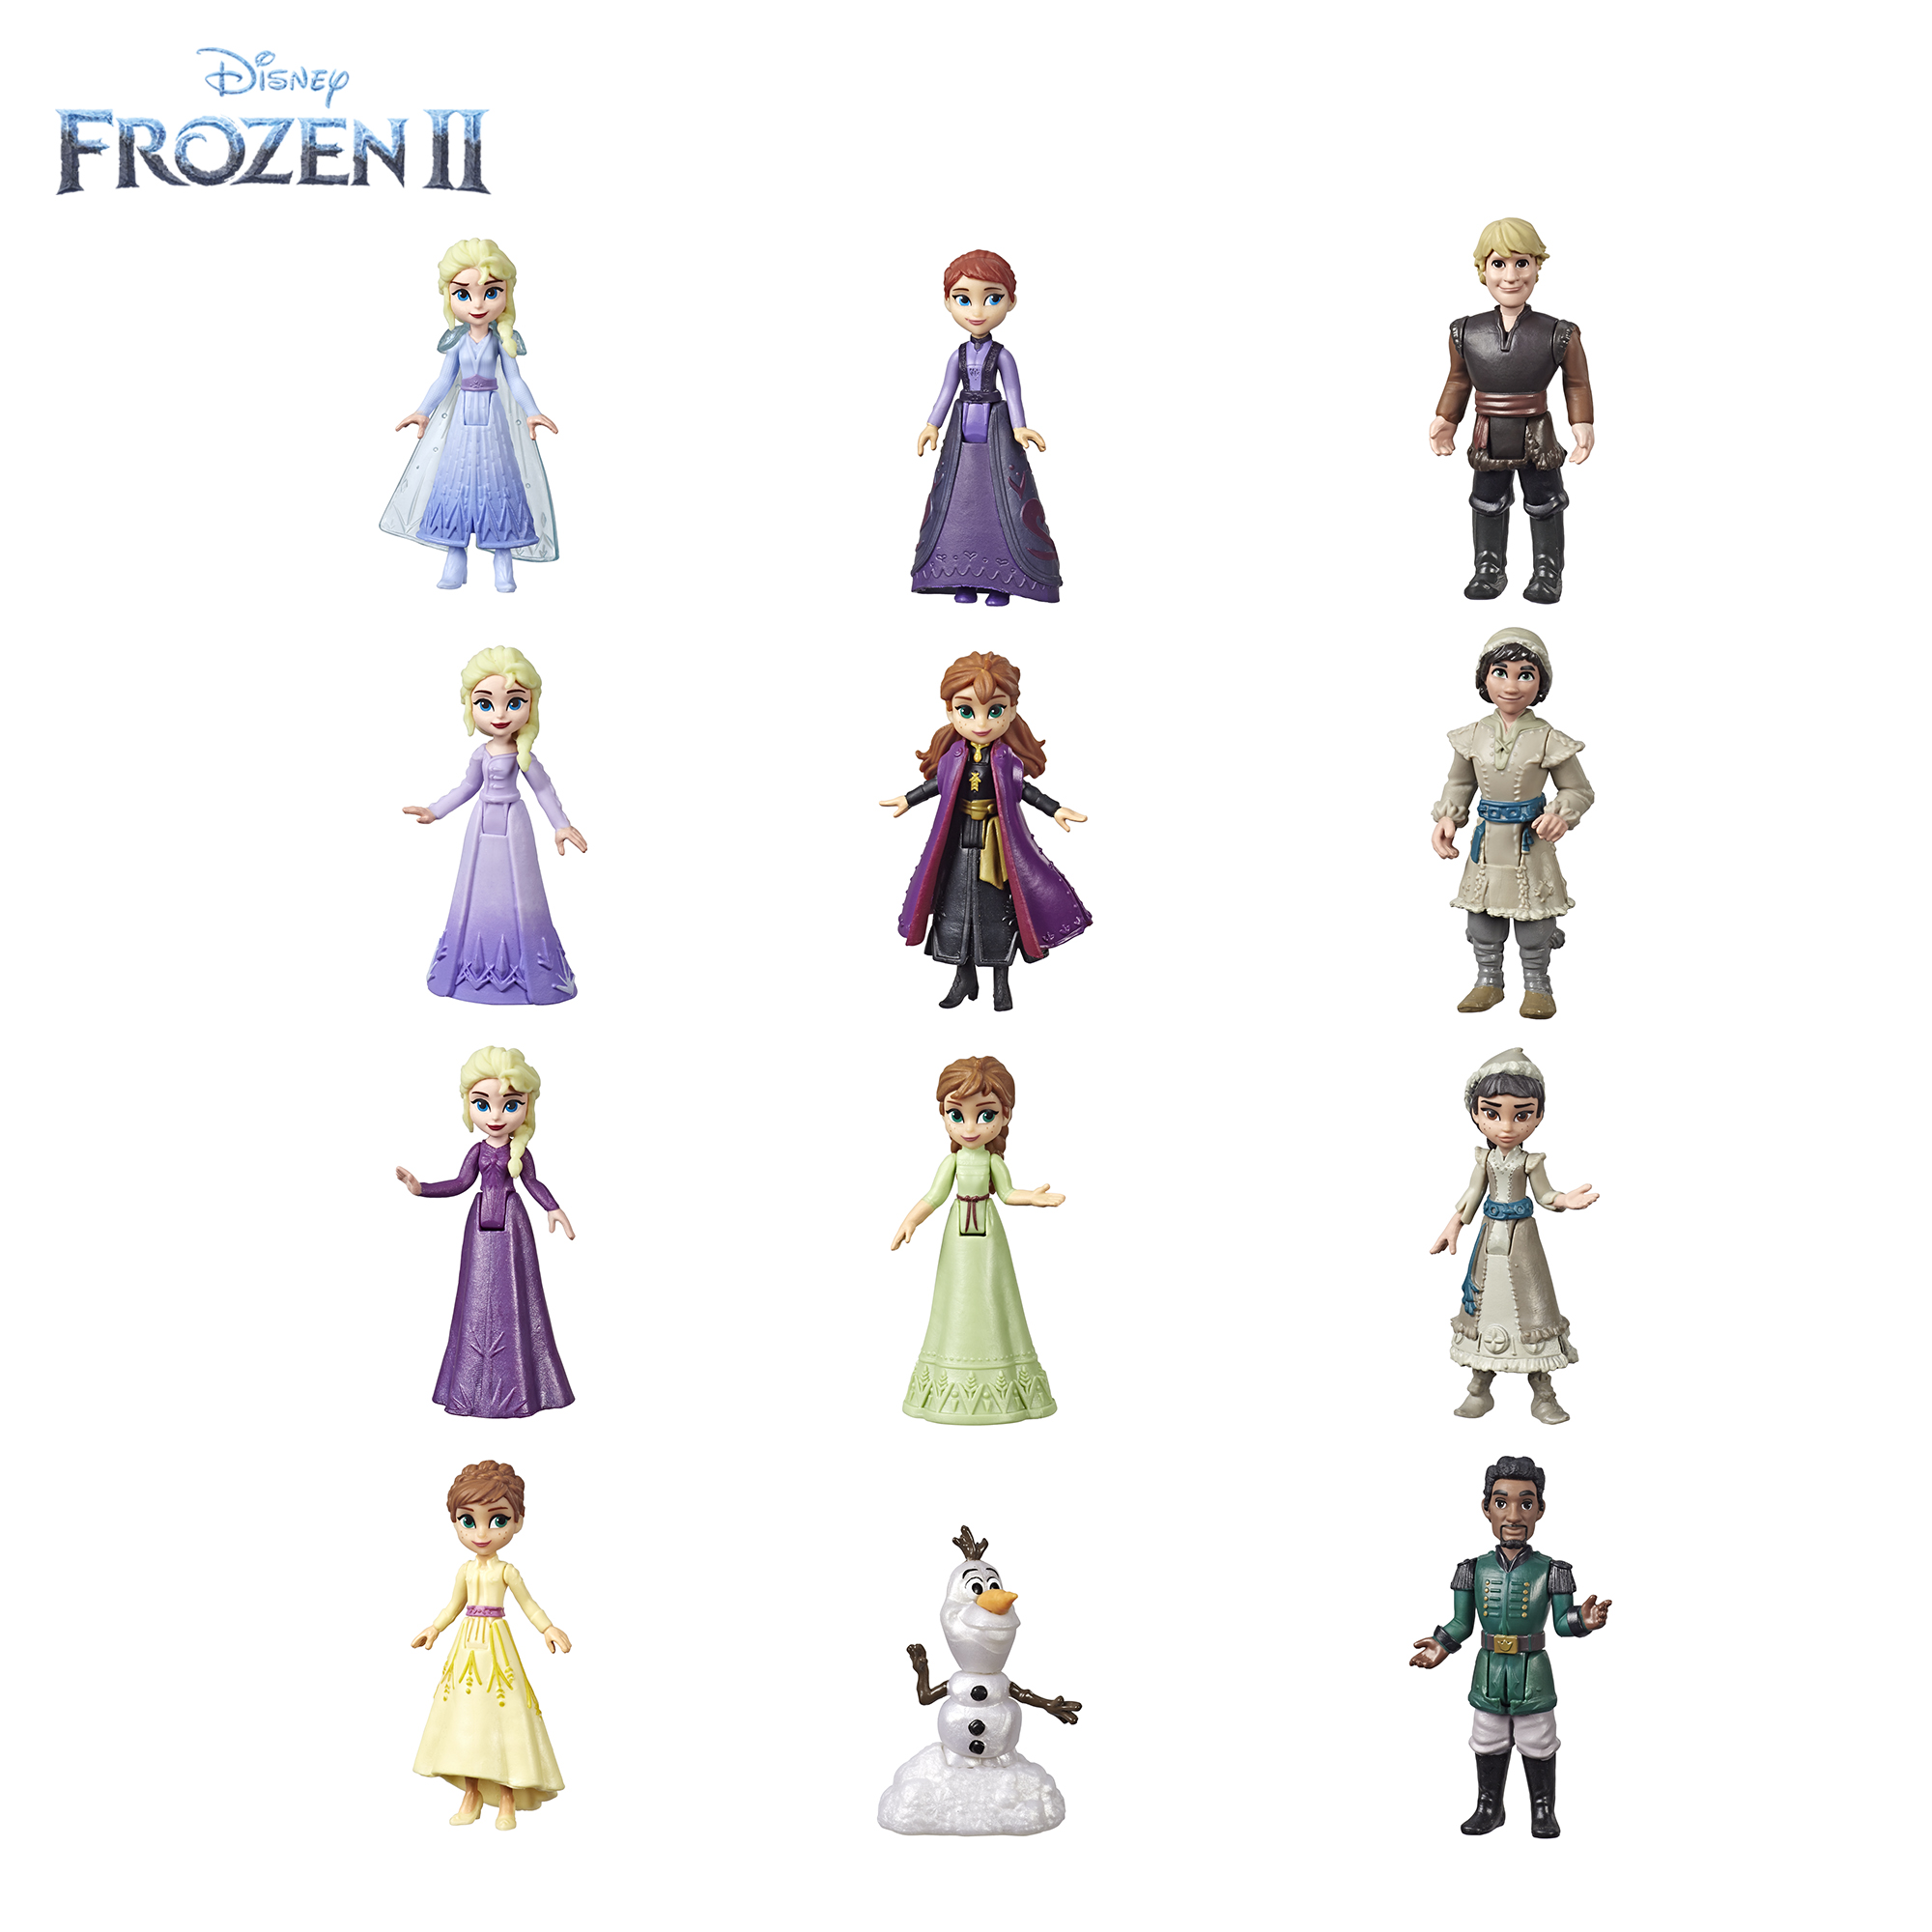 Hasbro S Frozen 2 Product Line Launches This Friday Check